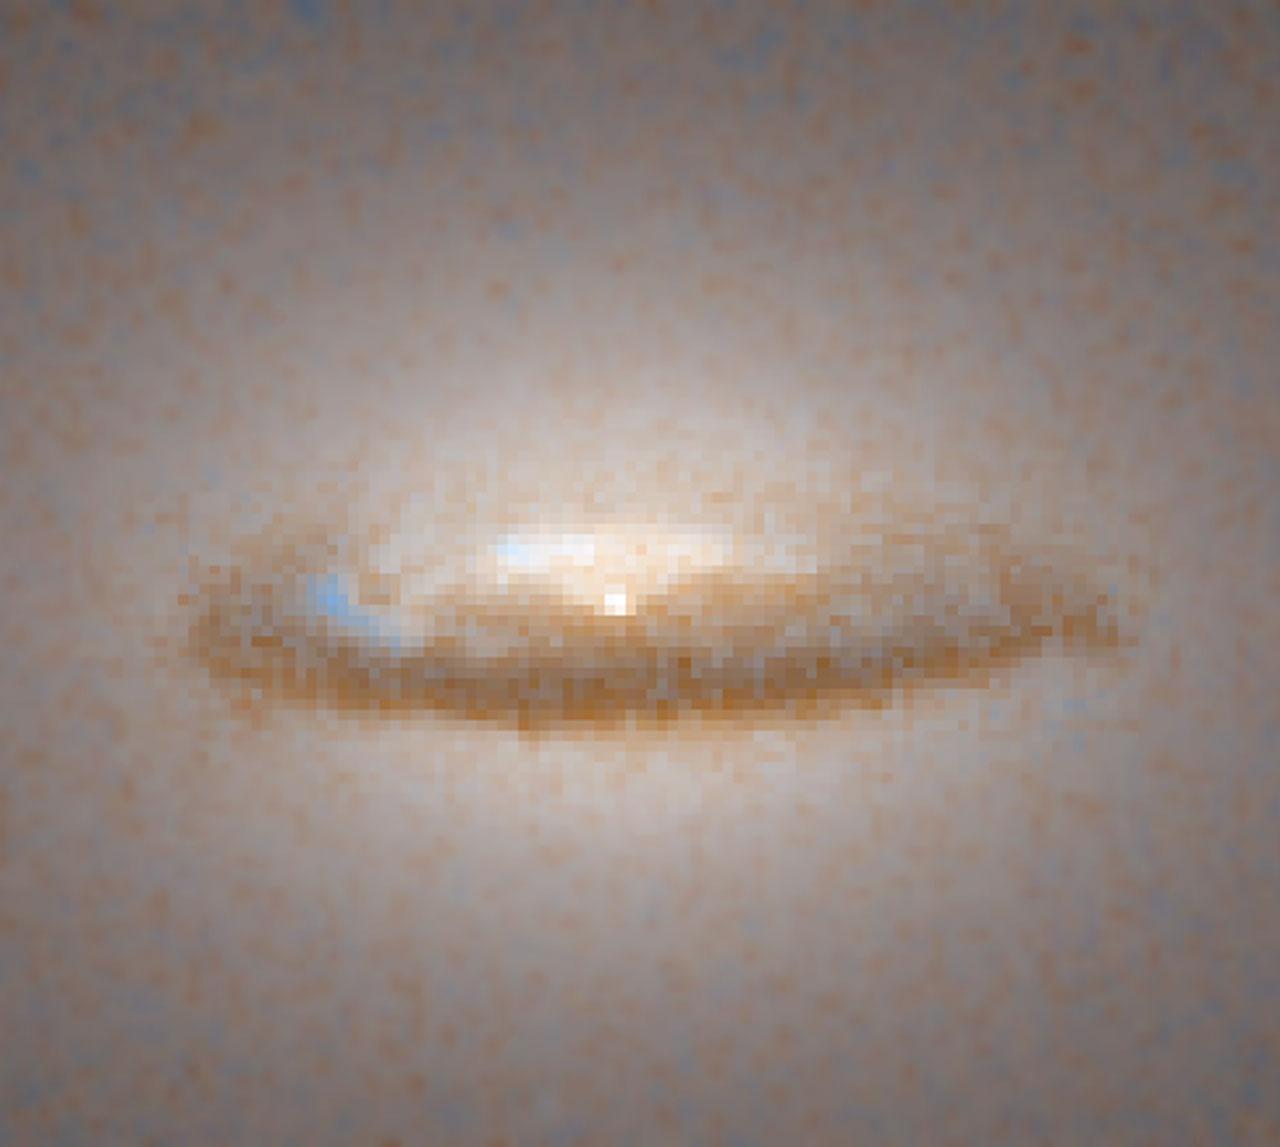 Black hole in NGC 7052